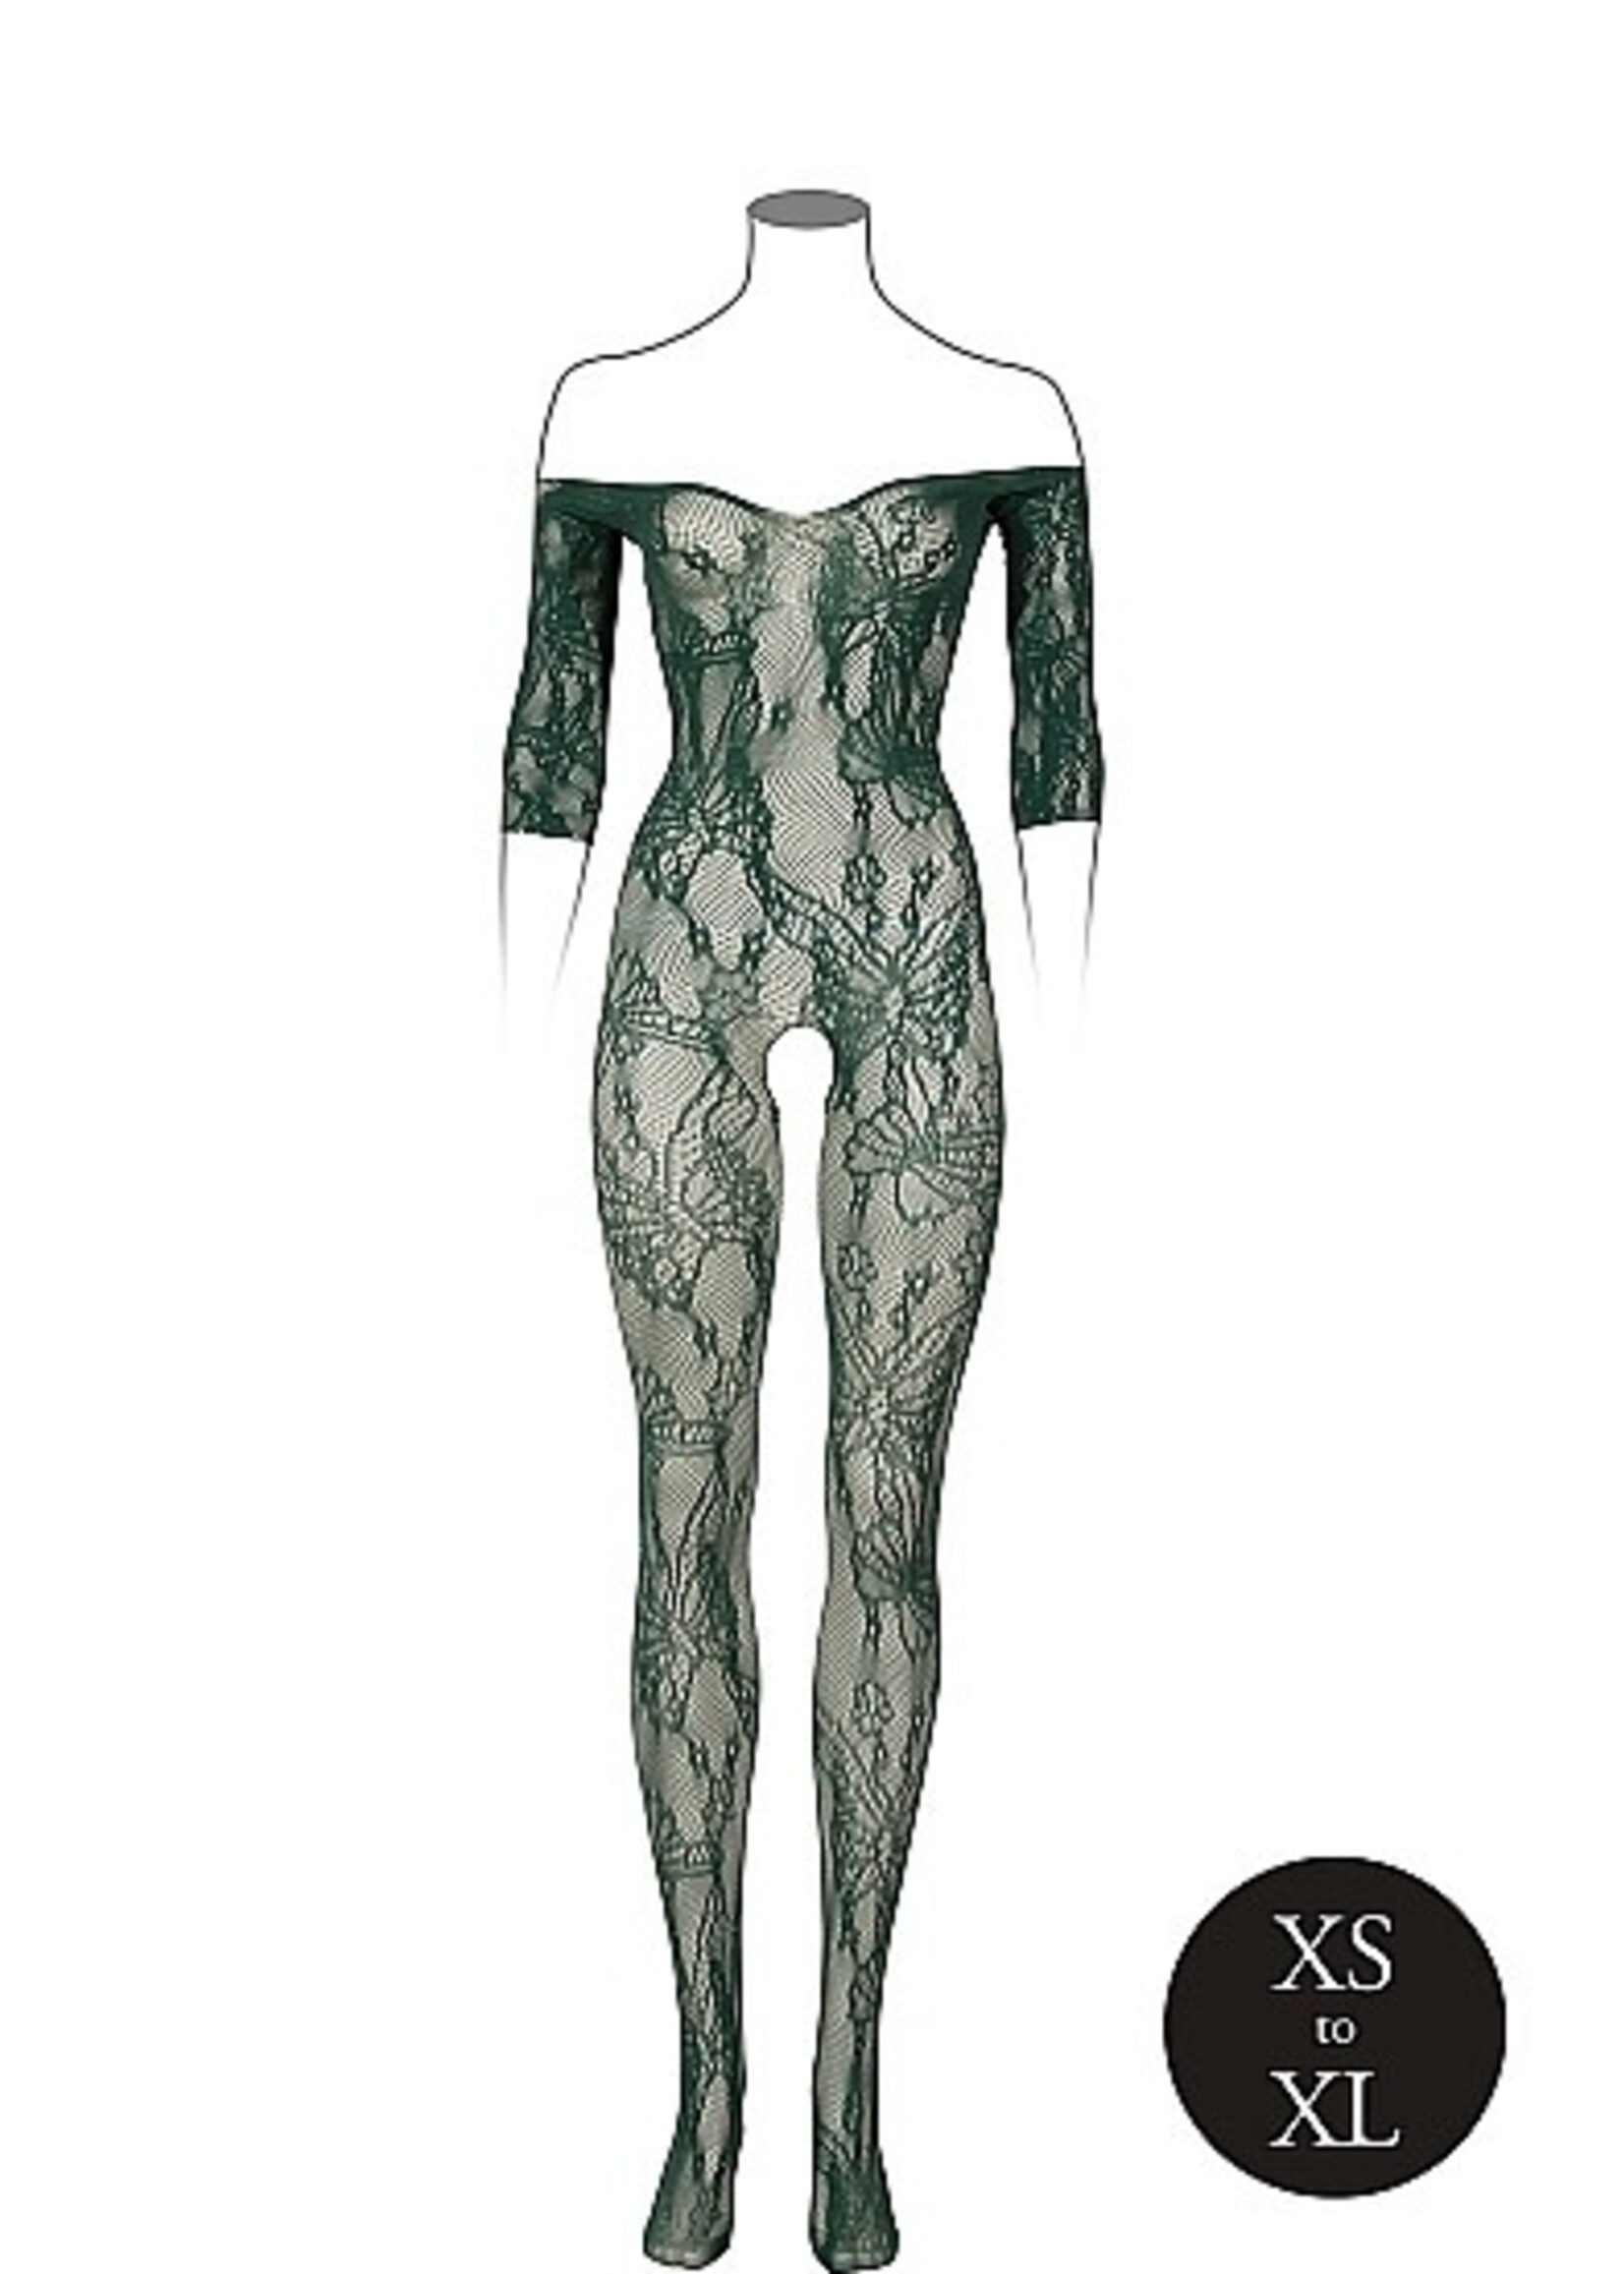 Le Désir Bodystocking long-sleeved and lace - midnight green - OneSize